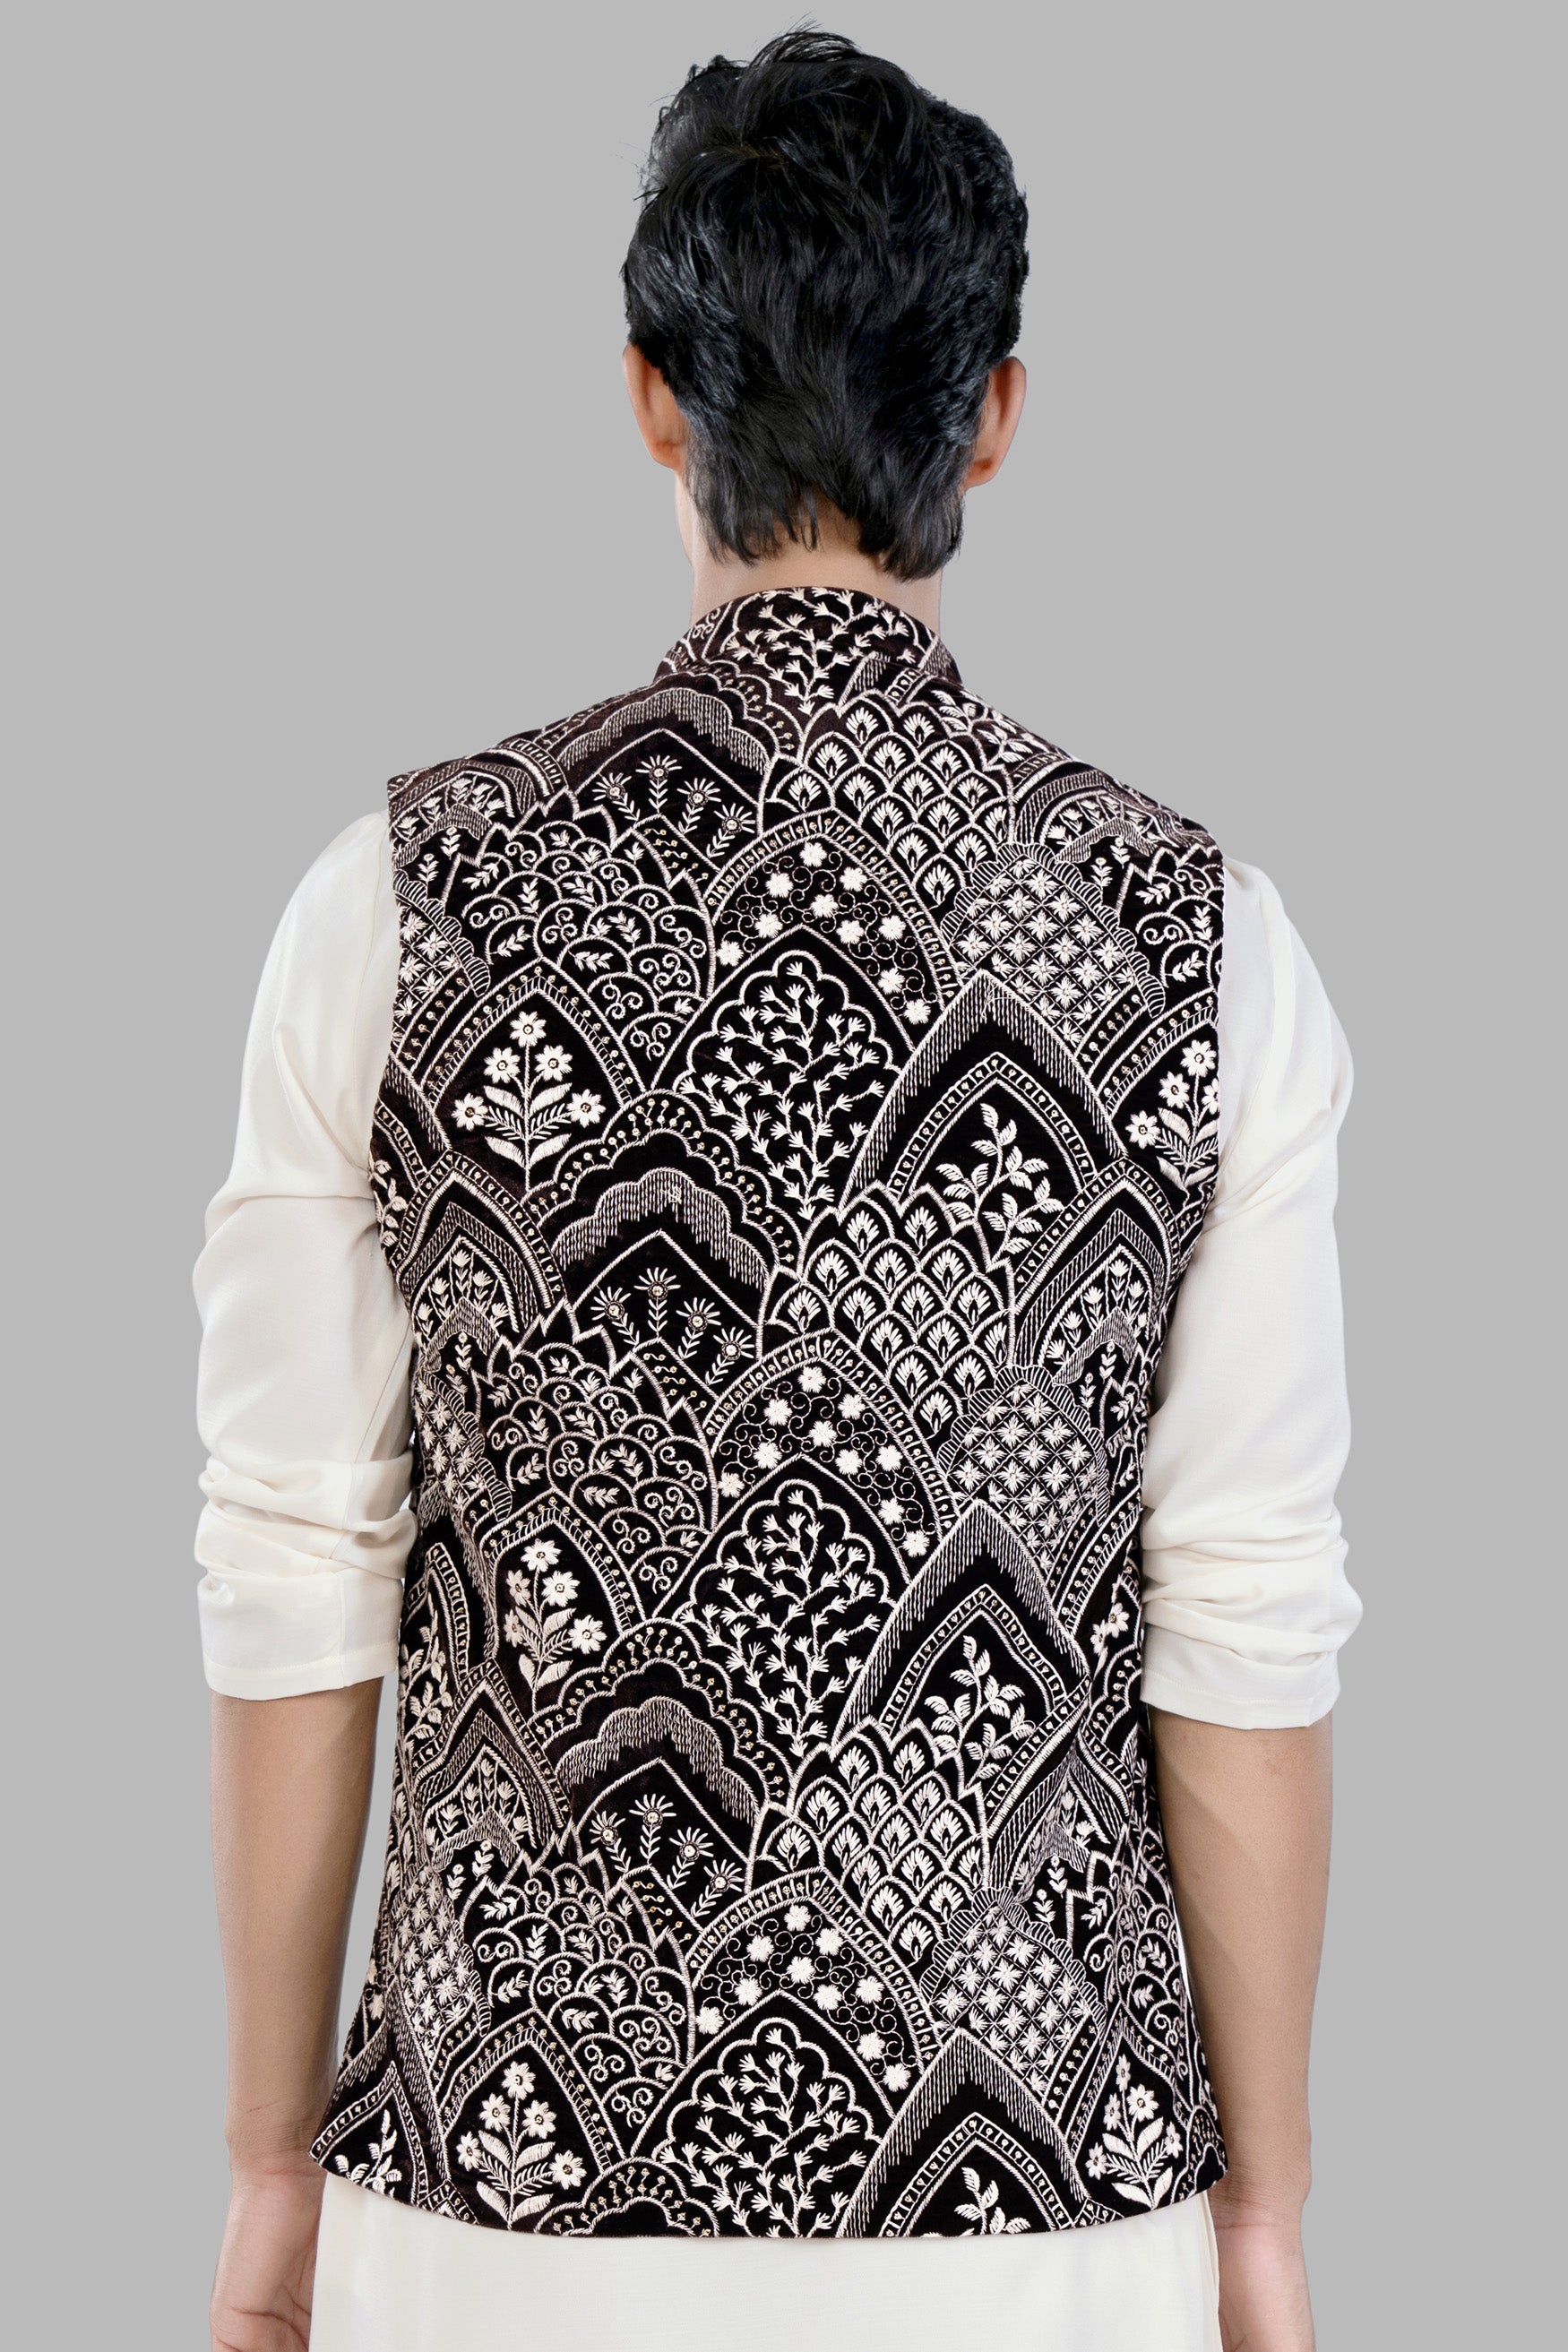 Crater Brown and White Floral Thread Embroidered Designer Nehru Jacket WC3476-36,  WC3476-38,  WC3476-40,  WC3476-42,  WC3476-44,  WC3476-46,  WC3476-48,  WC3476-50,  WC3476-52,  WC3476-54,  WC3476-56,  WC3476-58,  WC3476-60